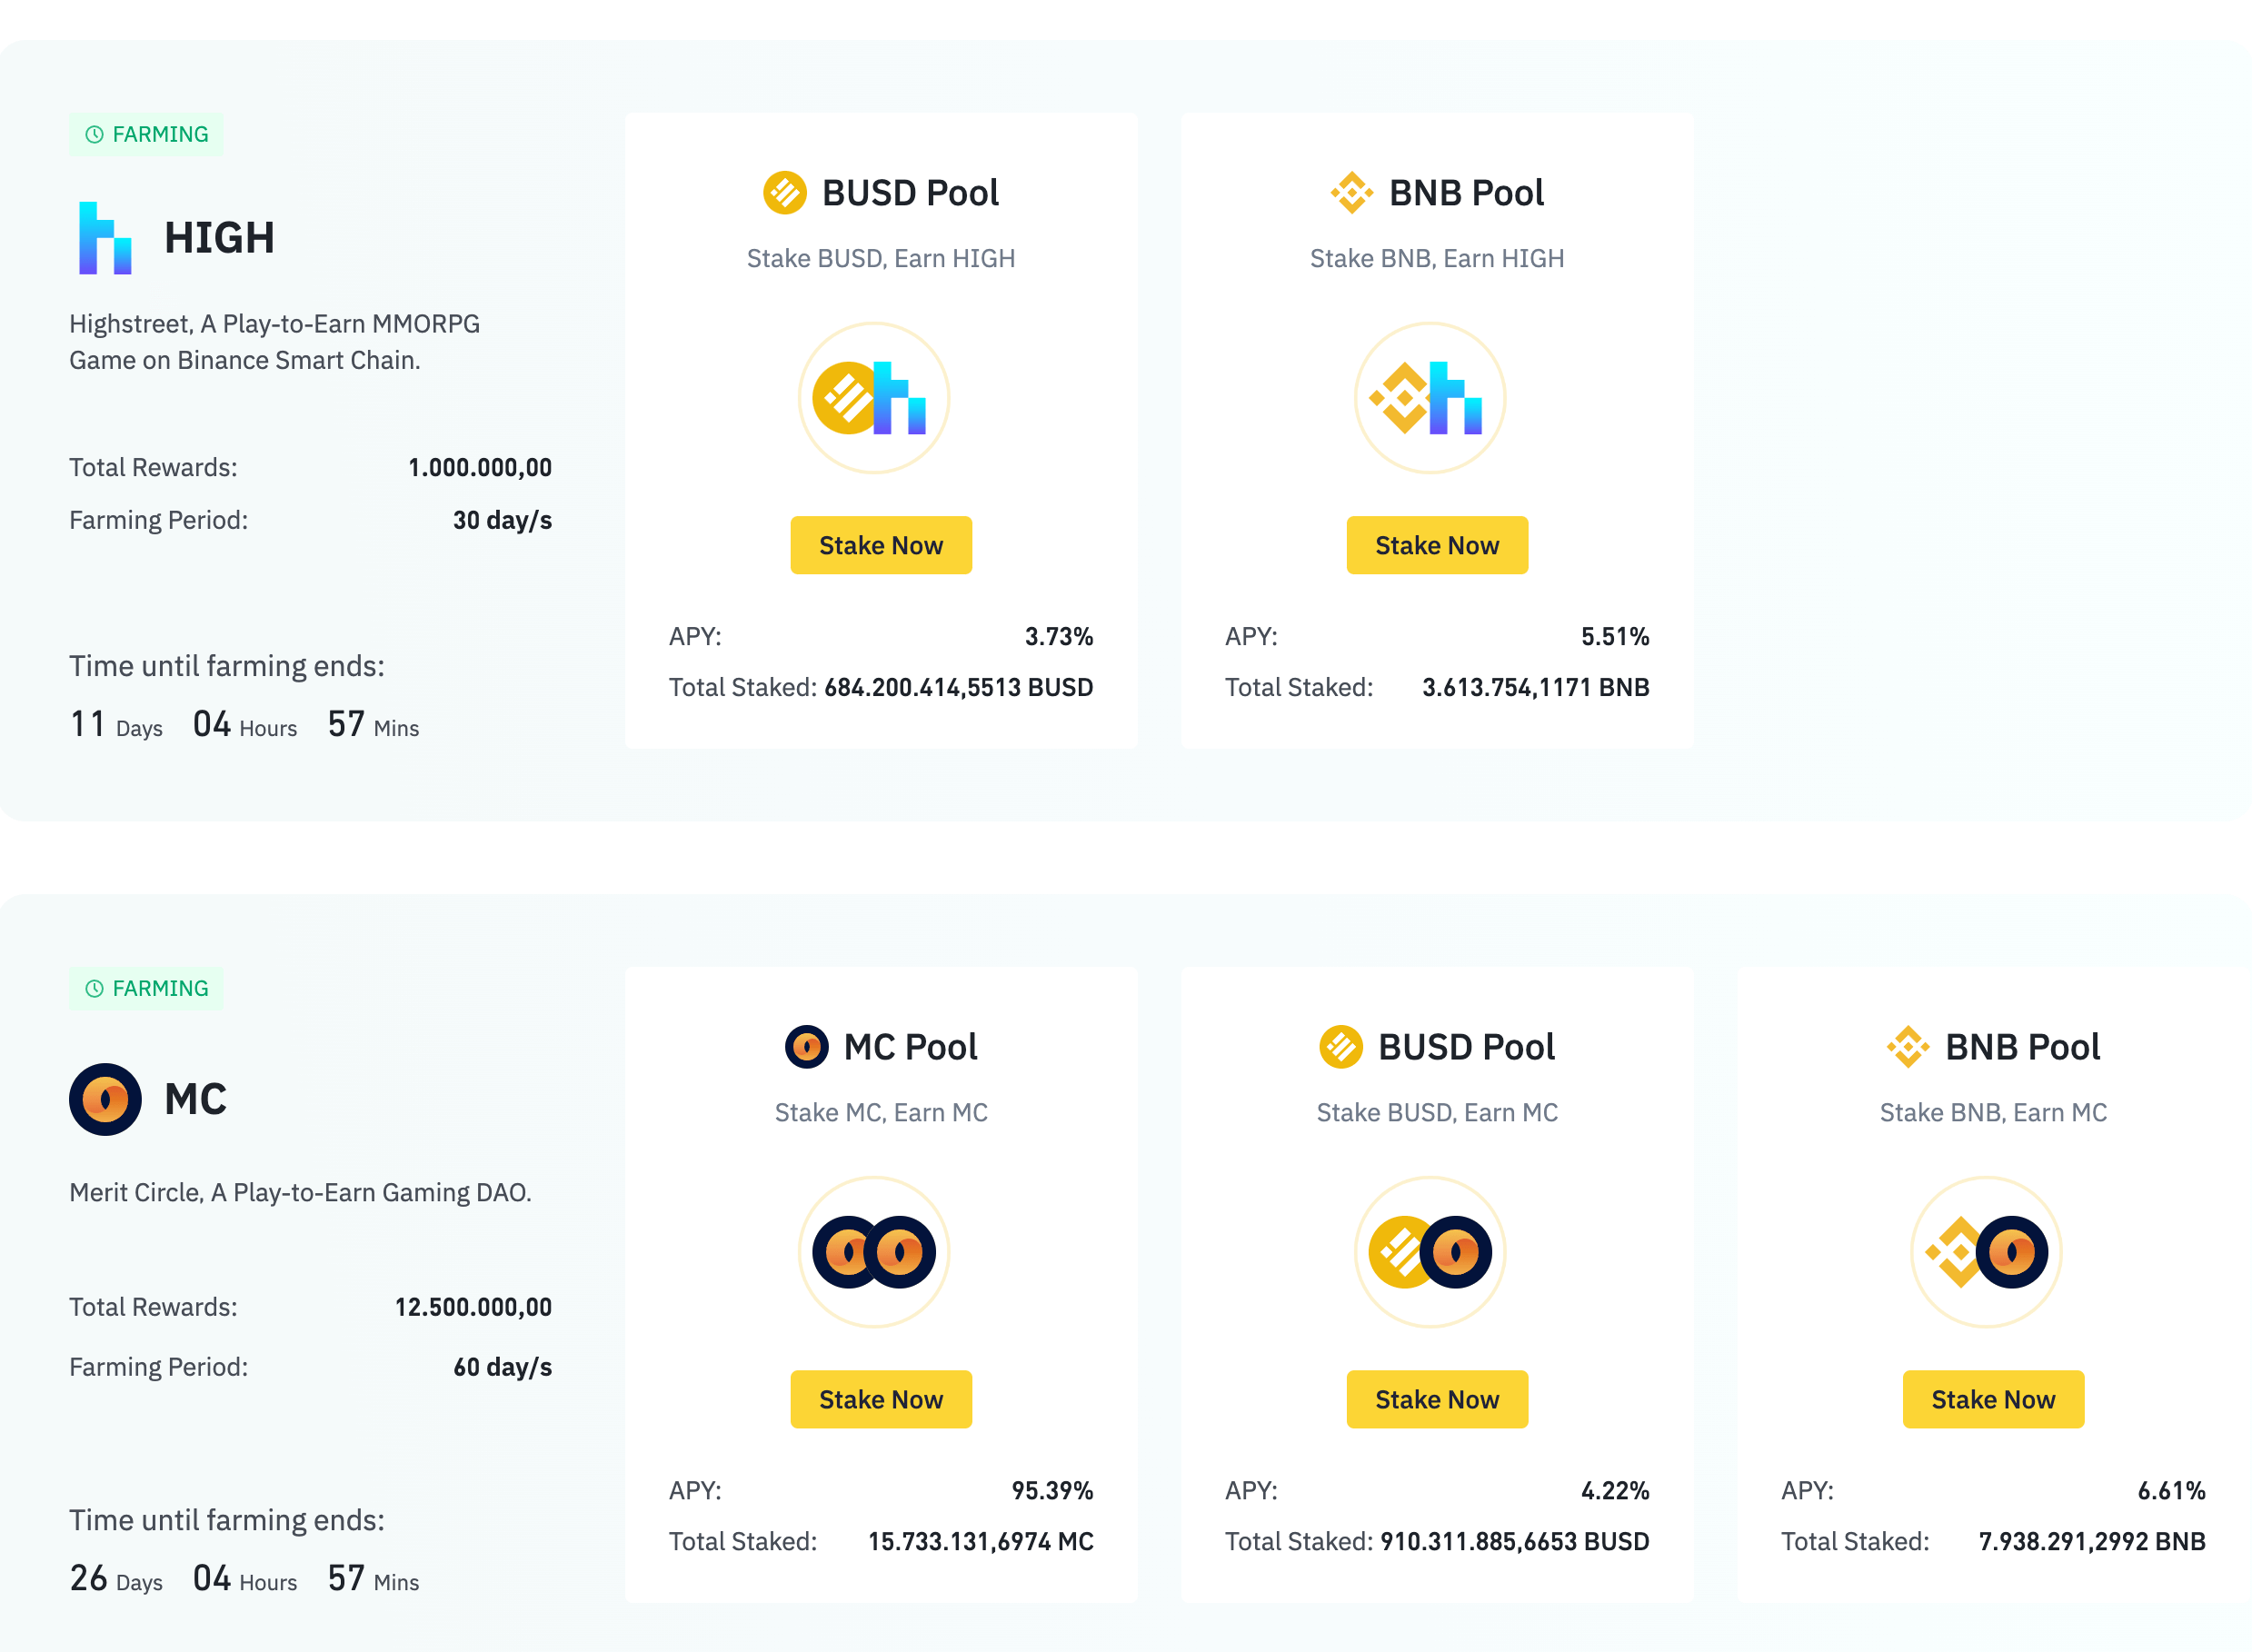 Binance Launchpad view. At the current time, the tokens «HIGH» and «MC» are in the farming phase. The phases will end in 11 days for HIGH and in 26 days for MC.